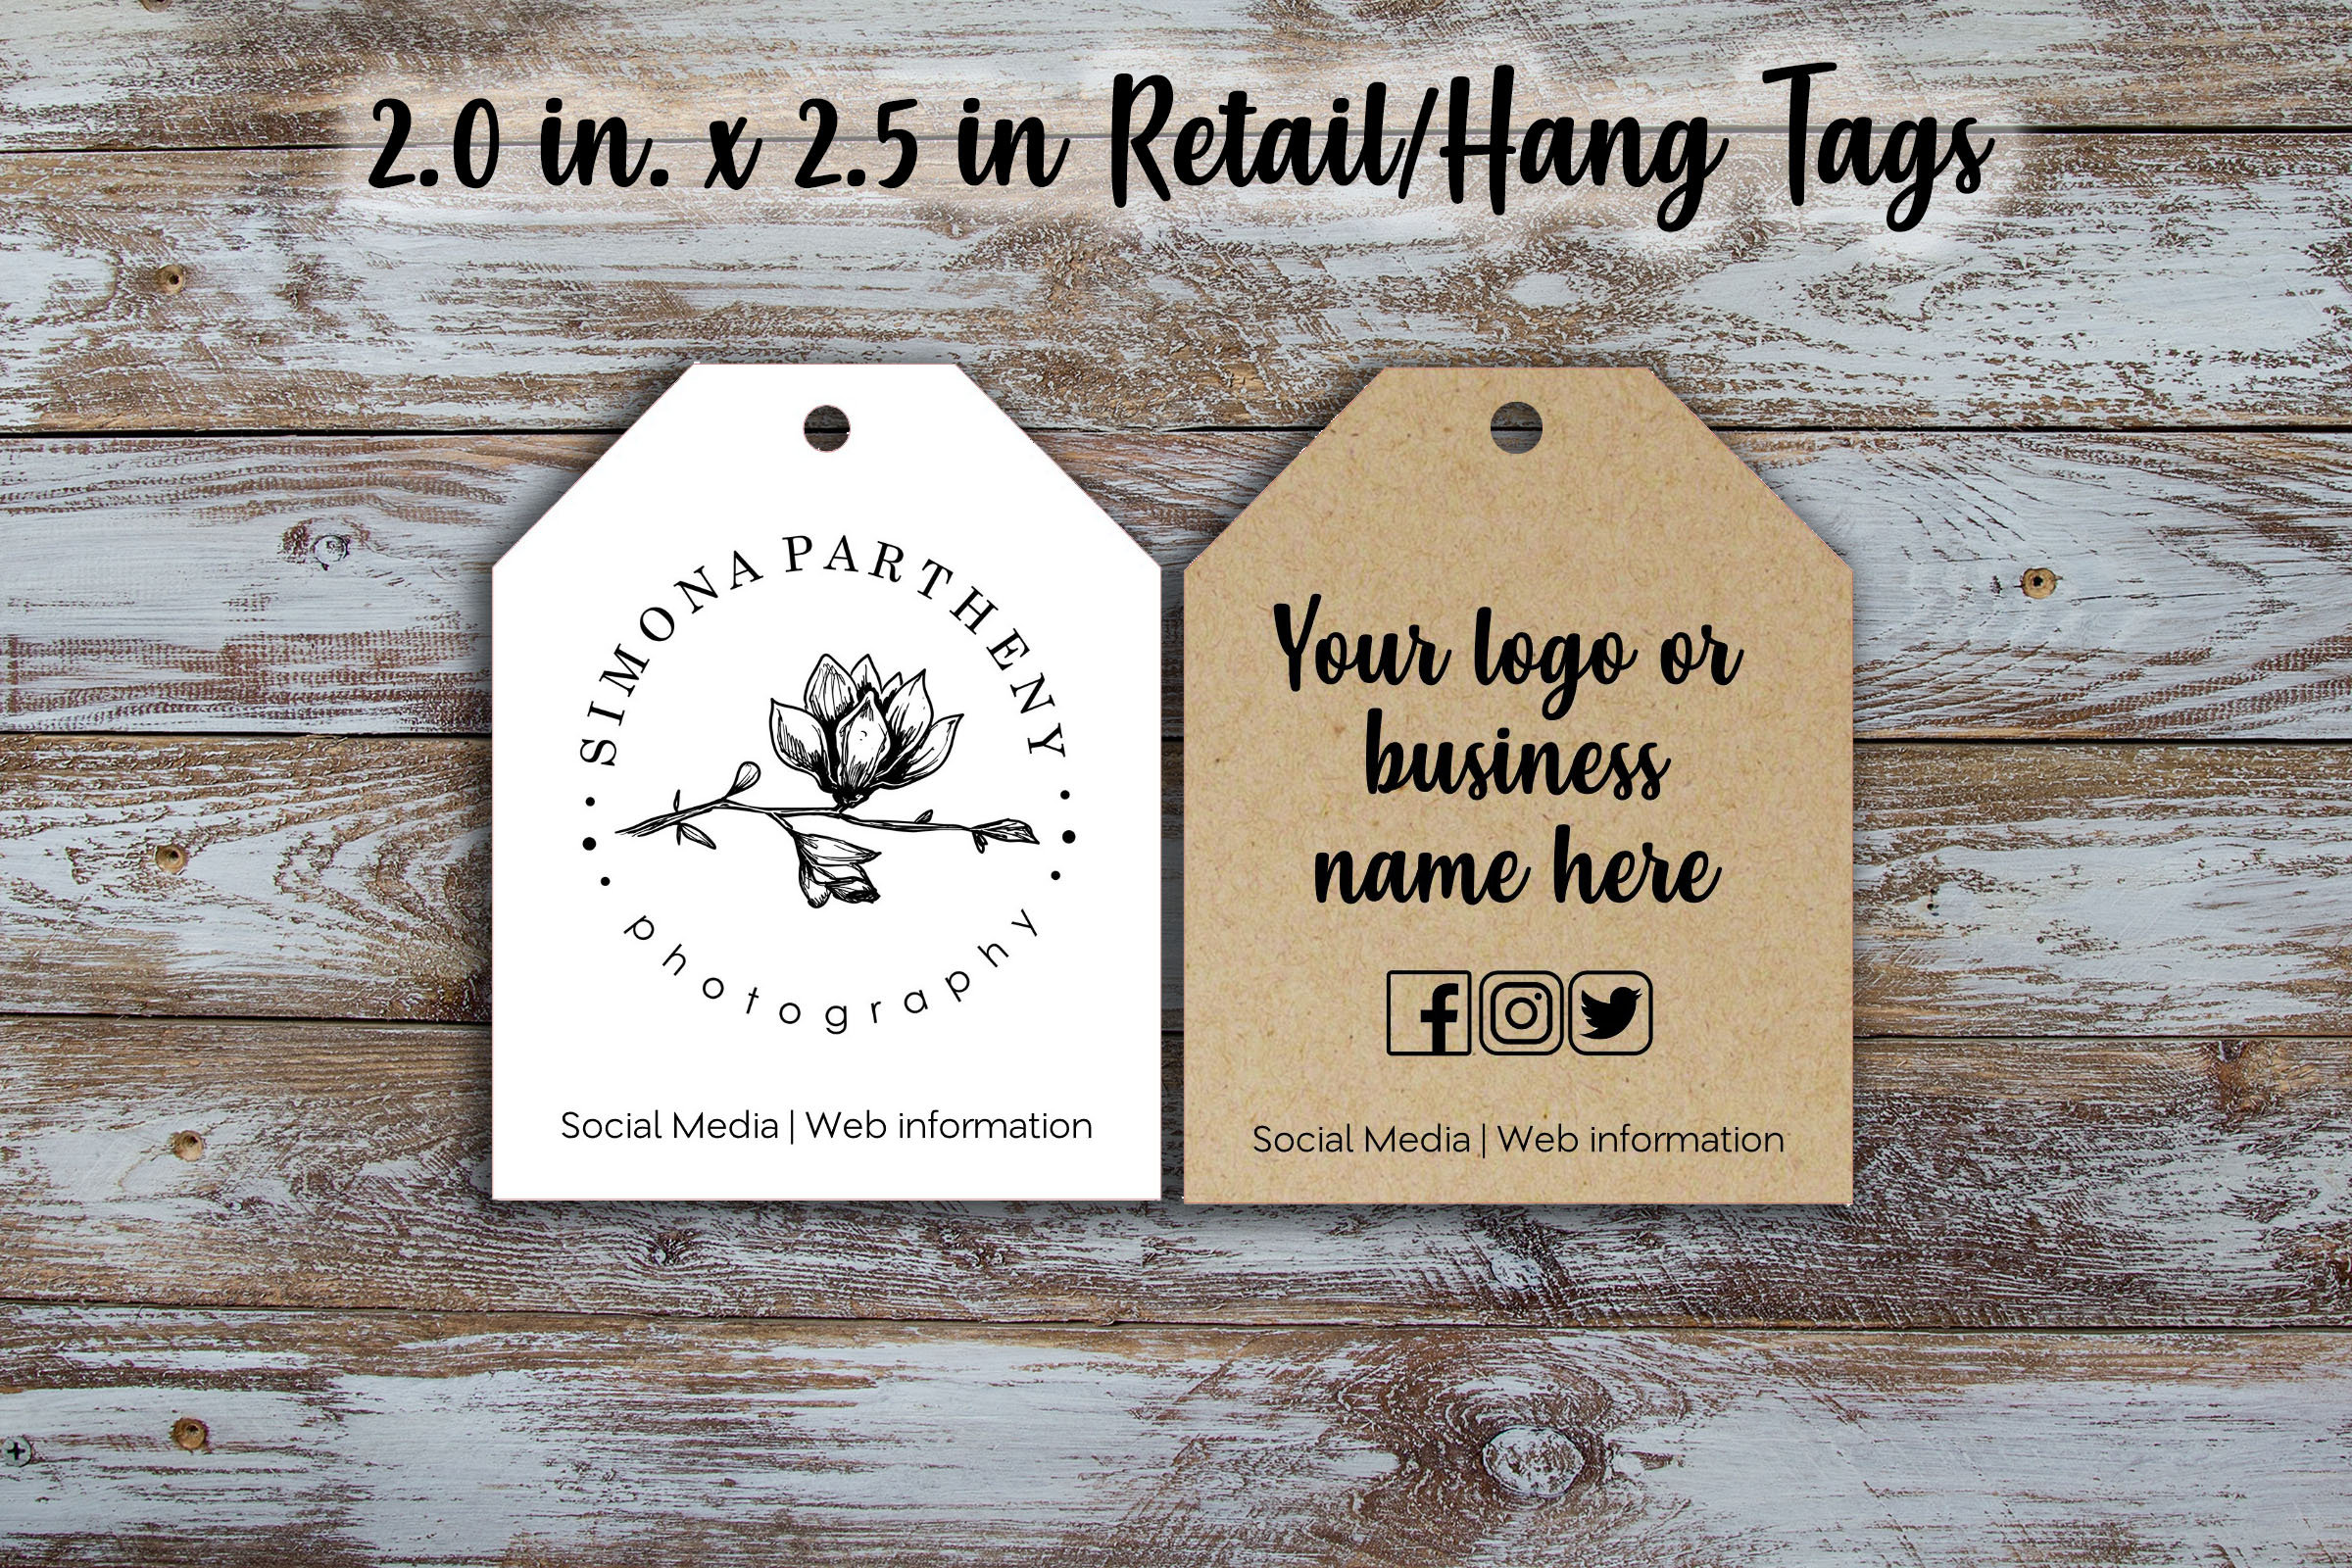 Custom Retail Tags 2.5 Inches by 2.00 Inches, Retail Tags, Clothing Tag,  Hang Tags, Personalize Tags, Wedding Tags 